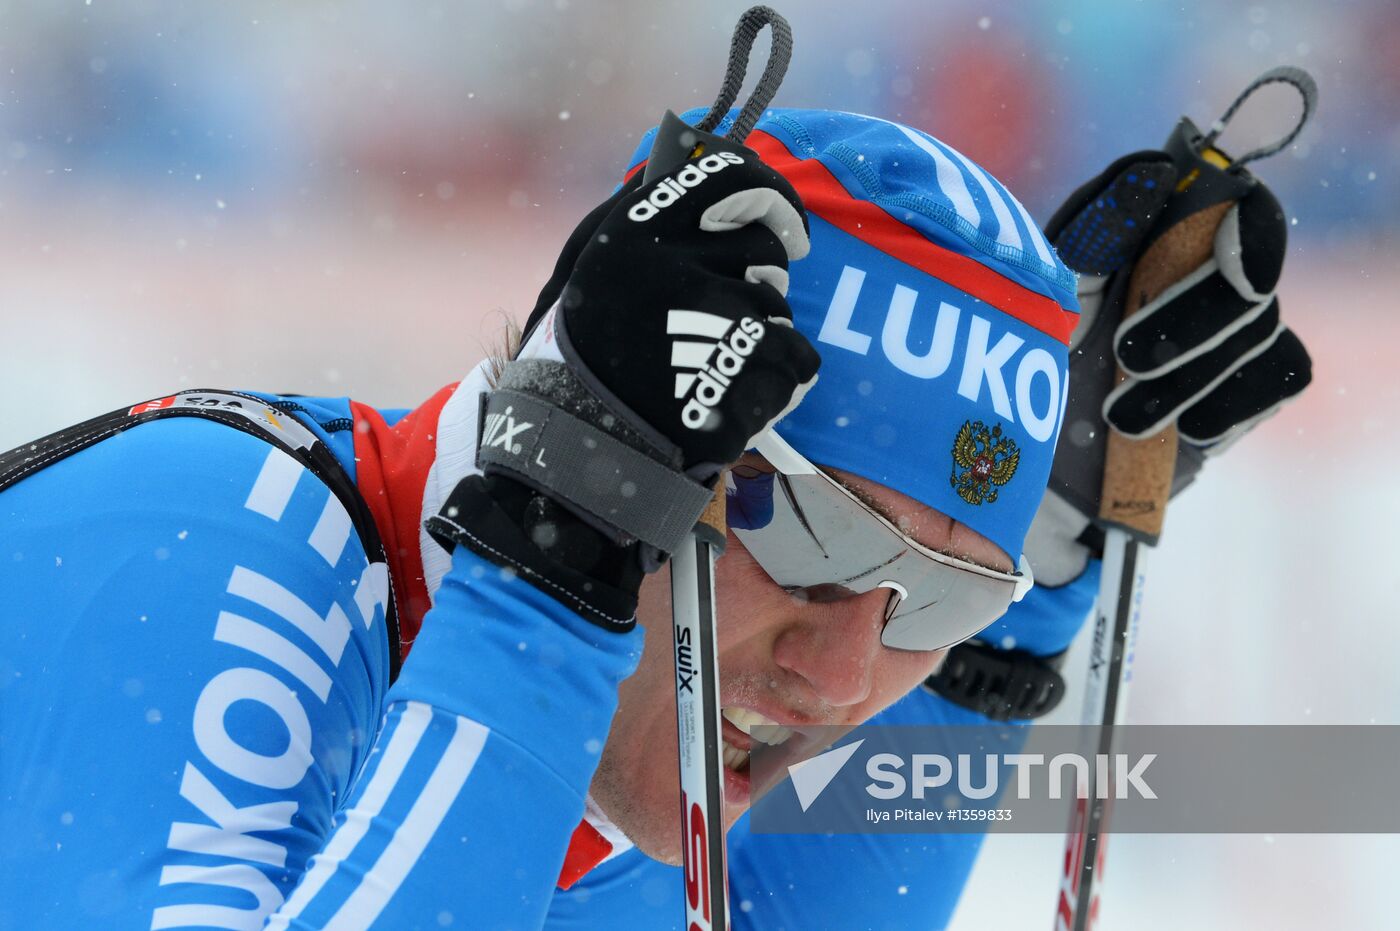 FIS Cross Country World Cup: Eighth Stage, Men's Sprint